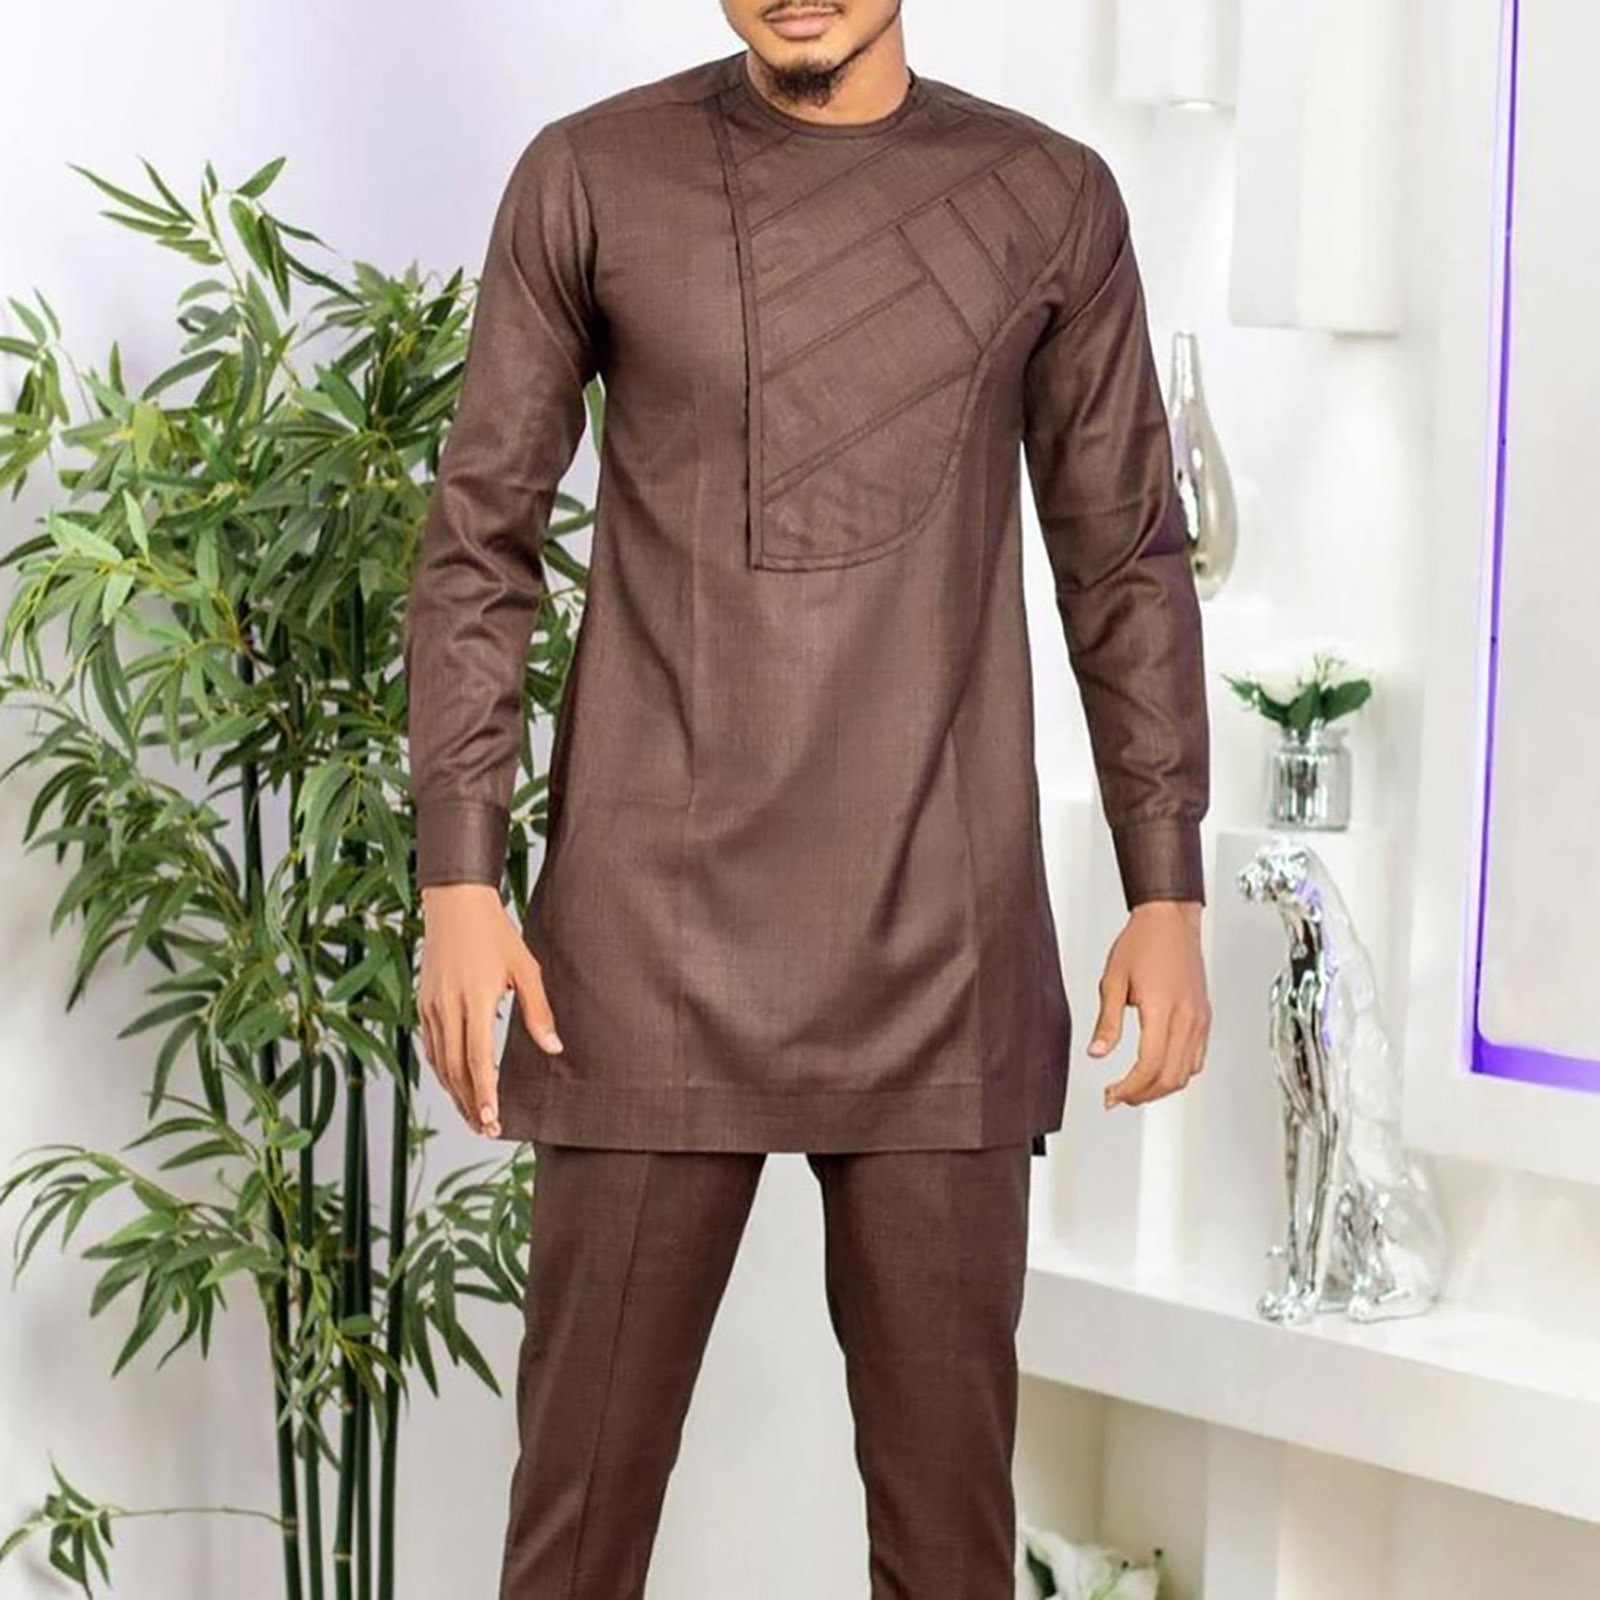 Men's African Suits|Stylish Ethnic Long-Sleeve Shirt & Pants for Weddings & Parties